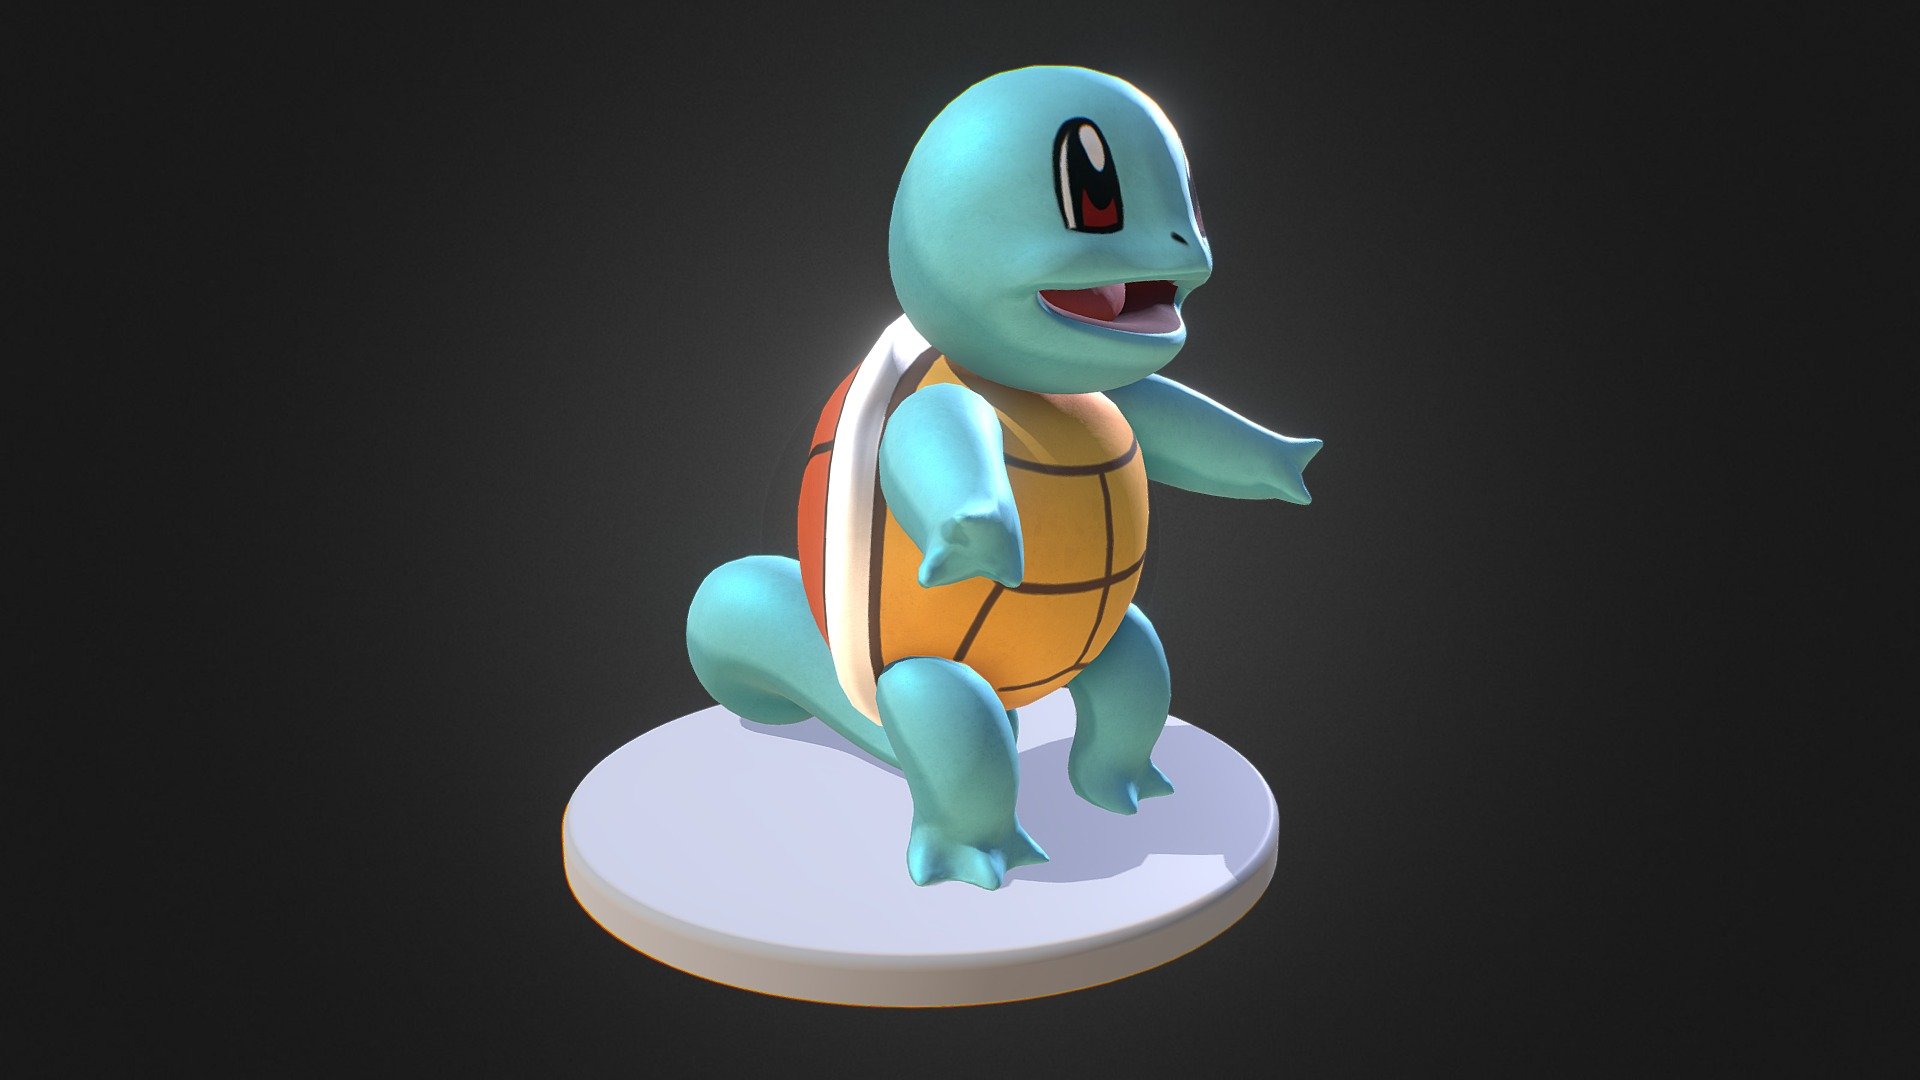 Pokemon Number 2 of 150. Squirtle - Squirtle Pokemon - 3D model by 3dlogicus 3d model